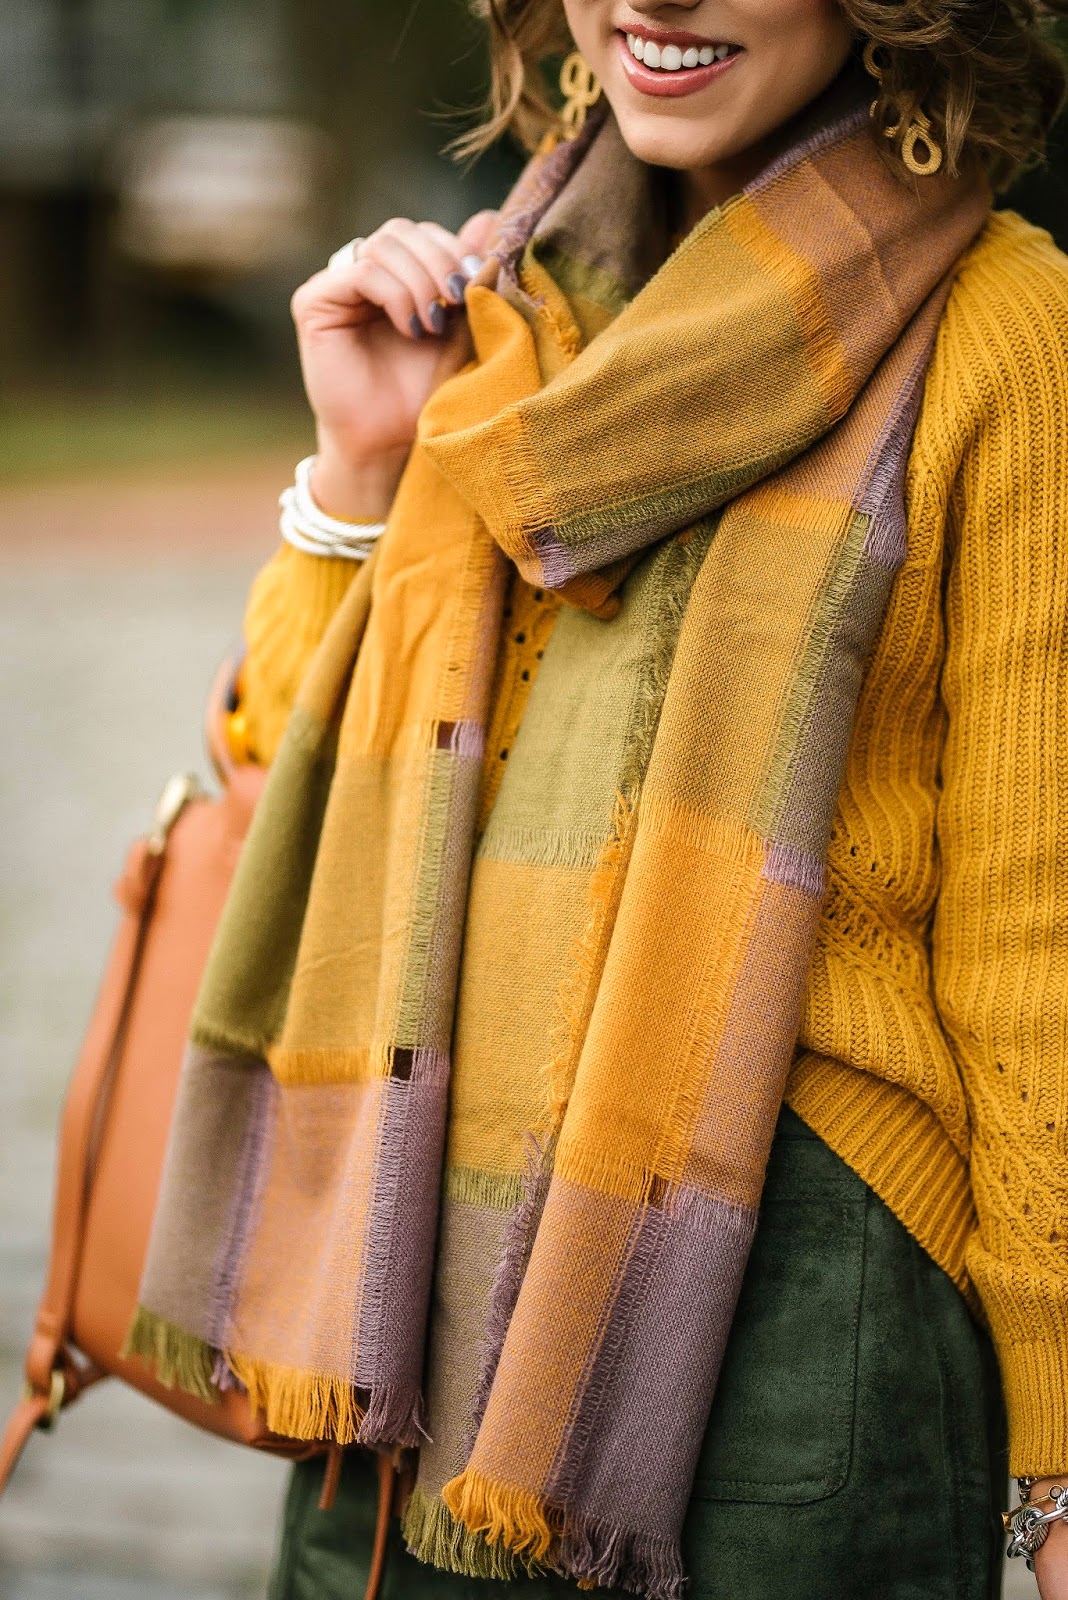 Mustard Yellow & Olive Green for Fall (Skirt, Sweater, Scarf and Bag each under $100) - Something Delightful Blog